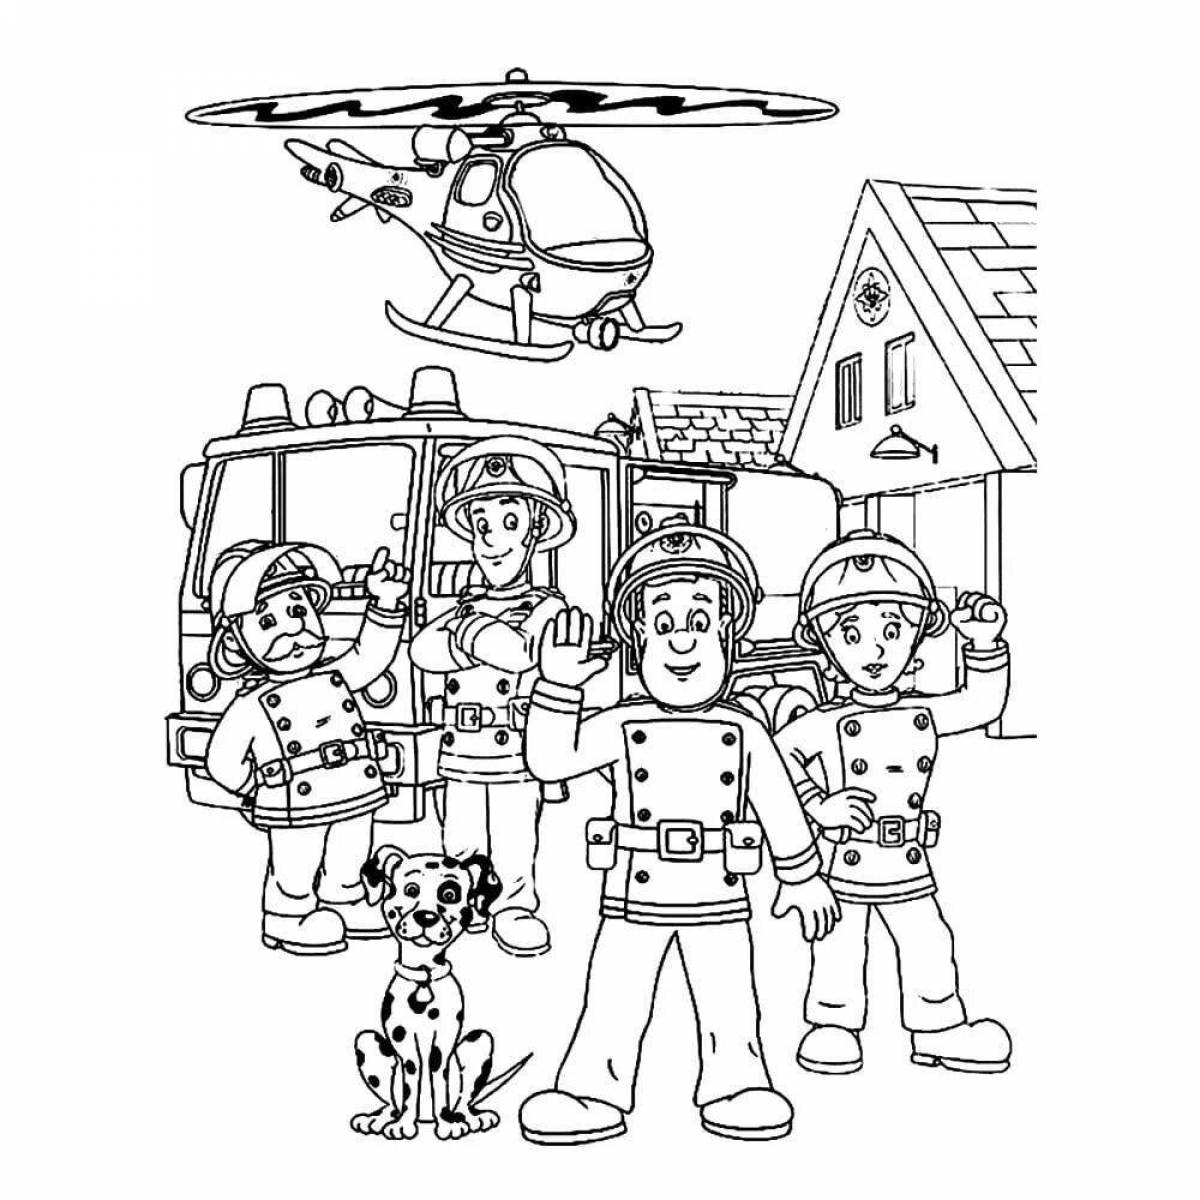 Coloring page happy lifeguards